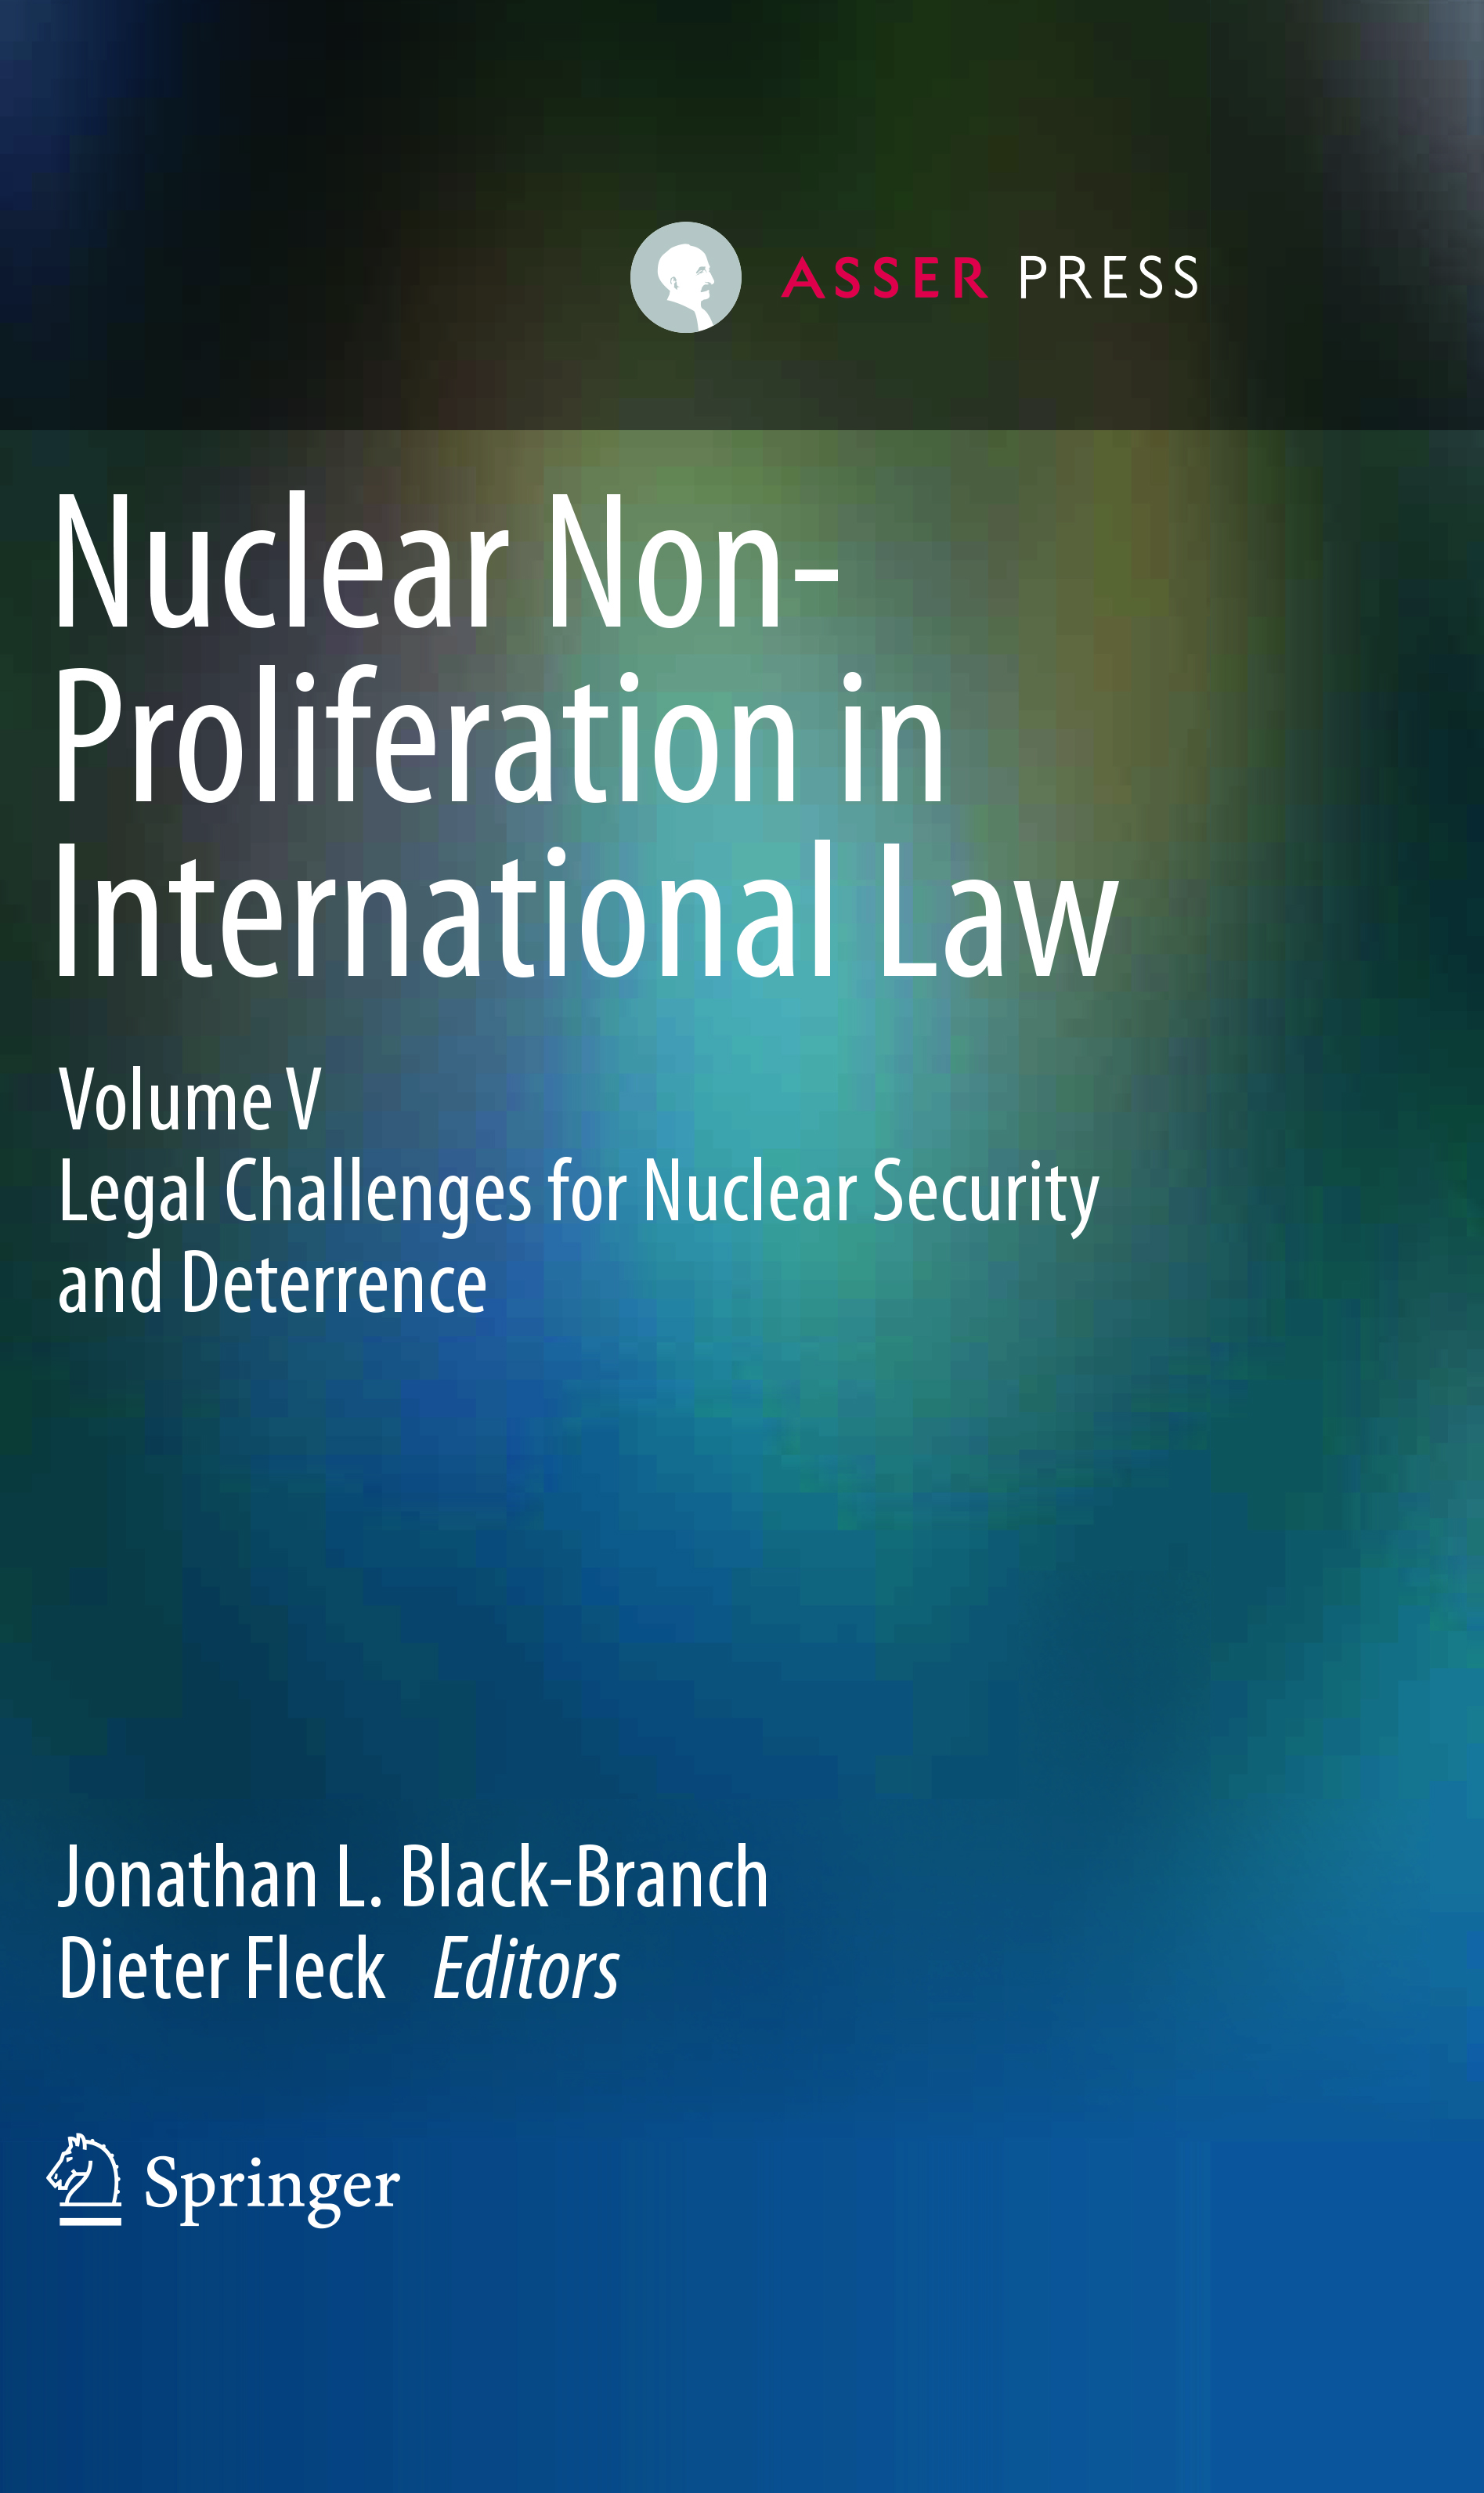 Nuclear Non-Proliferation in International Law - Volume V - Legal Challenges for Nuclear Security and Deterrence